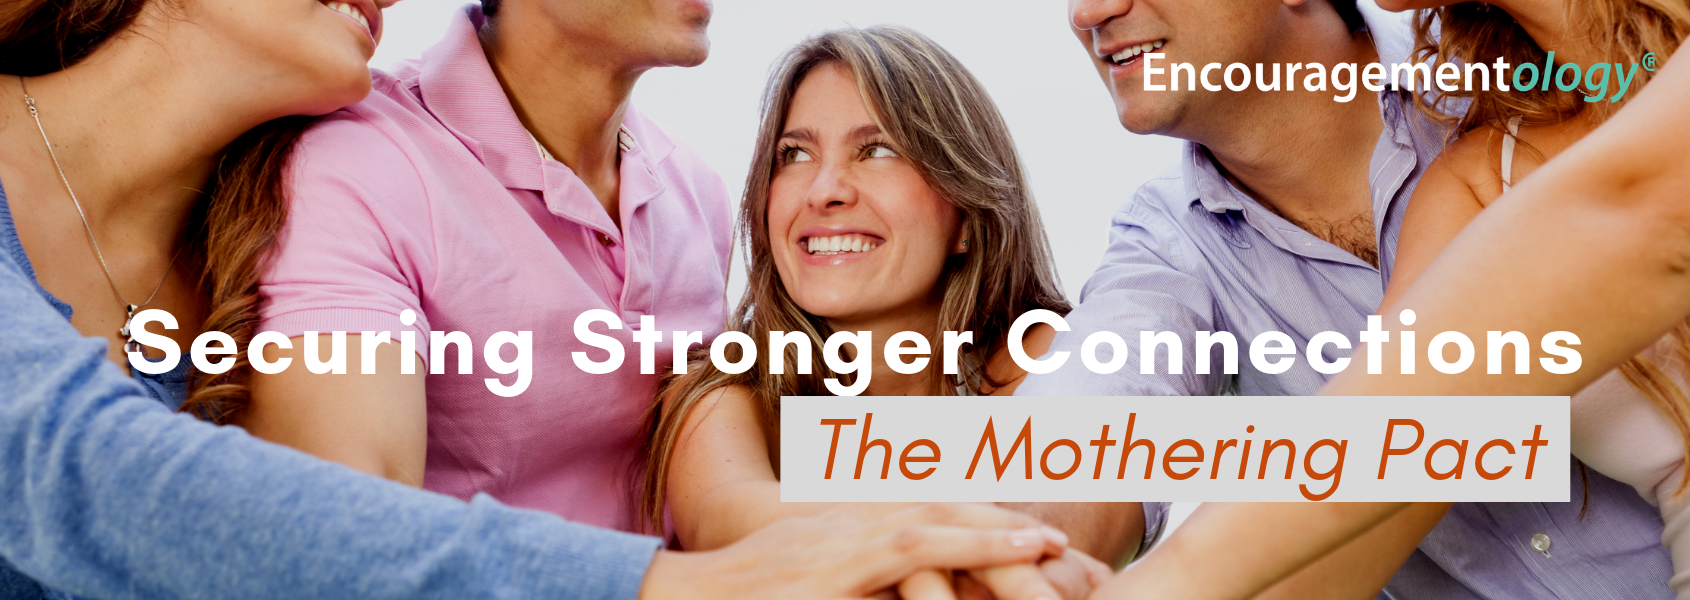 Securing Stronger Connections, The Mothering Pact - blog